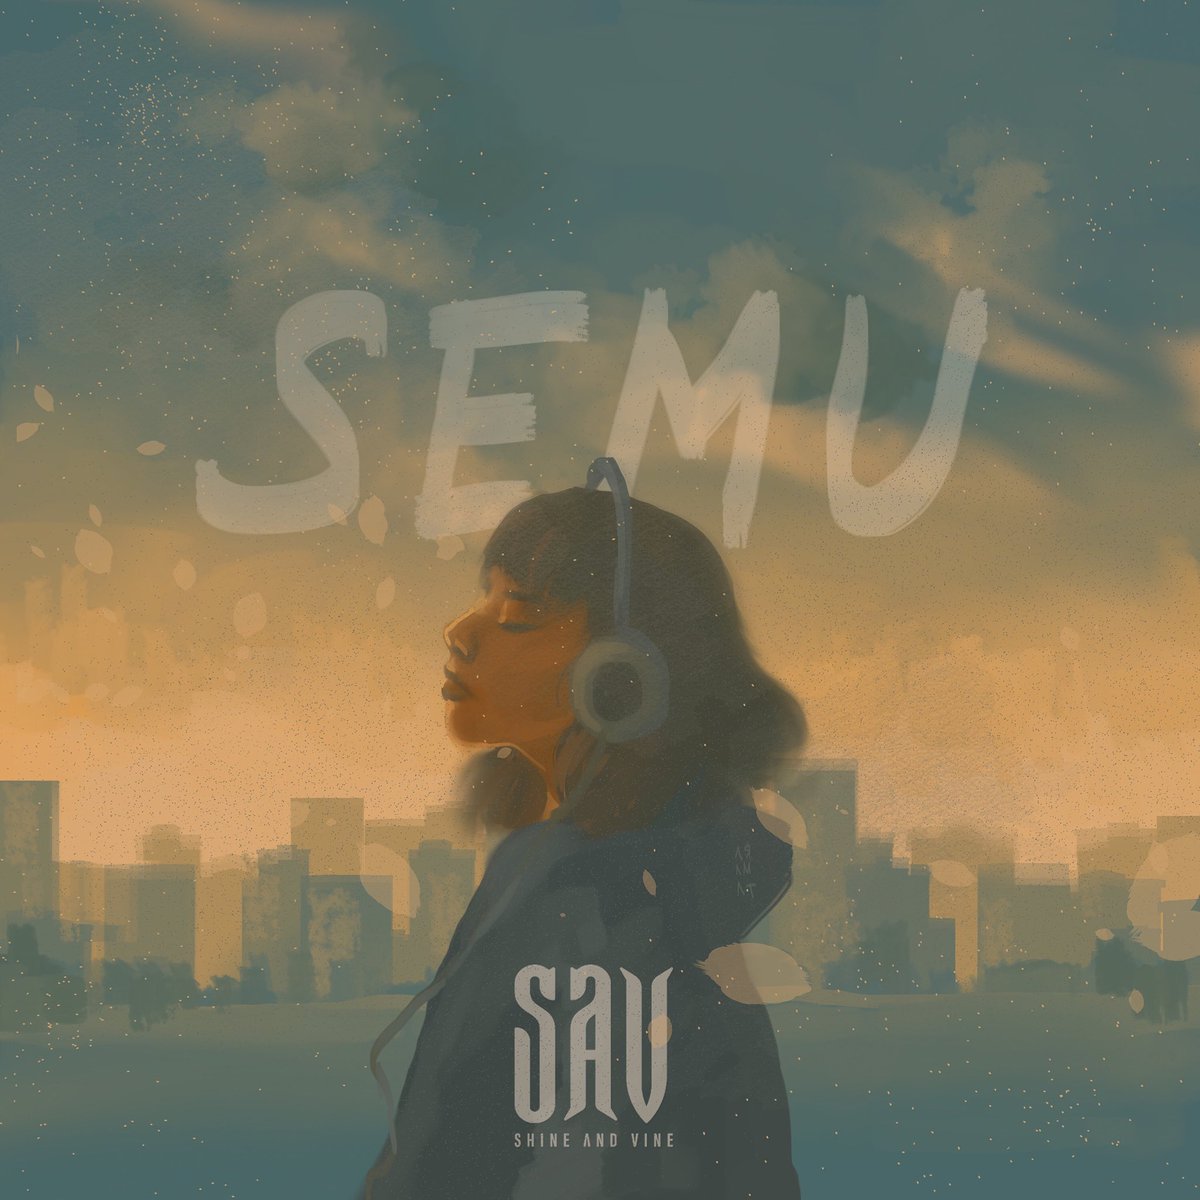 COMING SOON OUR FIRST SINGLE “SEMU”
.
CHECK THIS OUT ON 2 MAY 2021
.
realized that your life is not as beautiful as you expected .. so
try to enjoy your life even if it's not what you expect
.
#band #SΛV #shineandvine #semu #single #newsingle #newsinglecomingsoon #comingsoon‼️